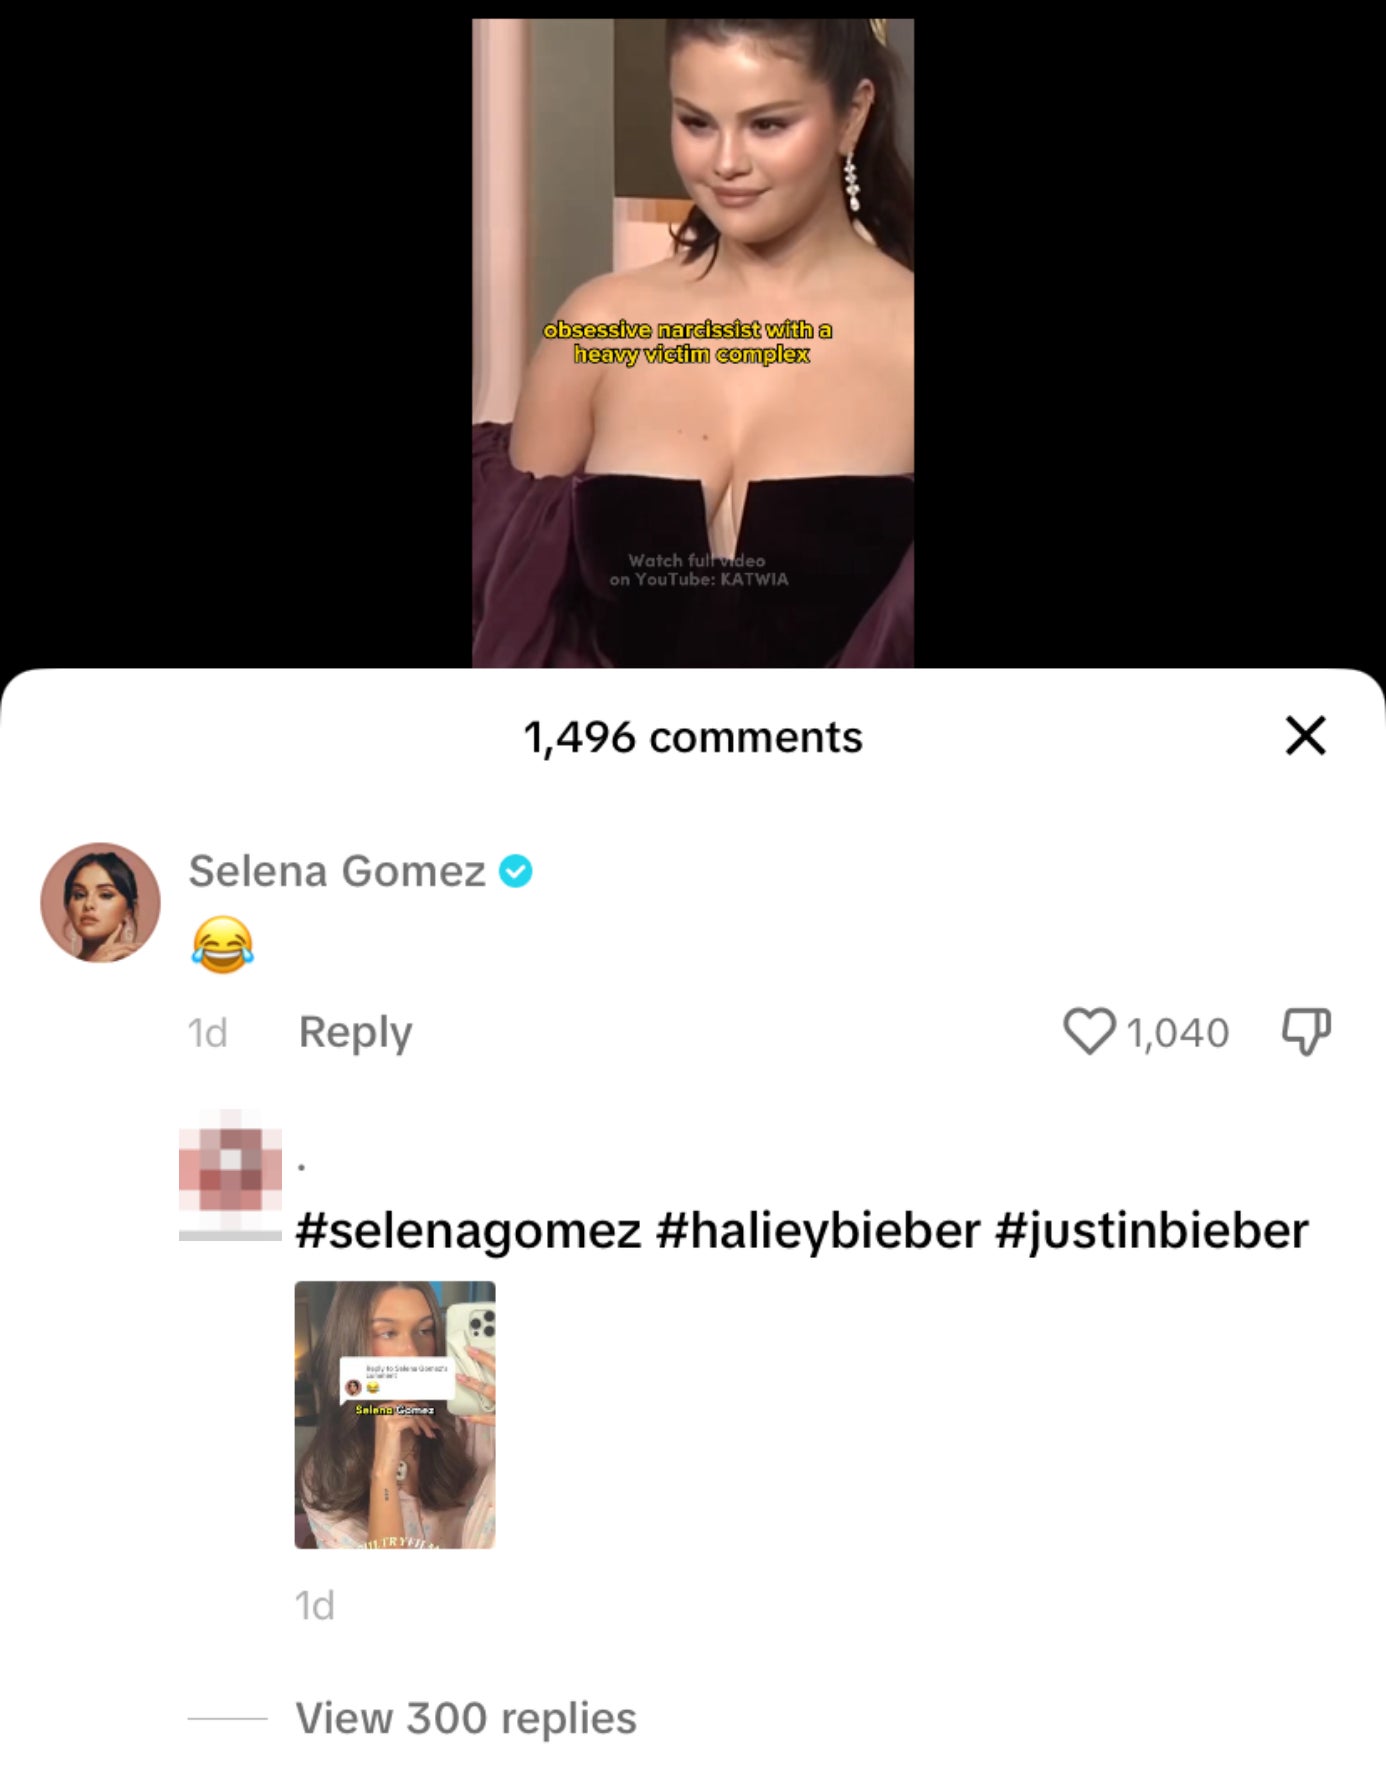 selena&#x27;s comment on the video